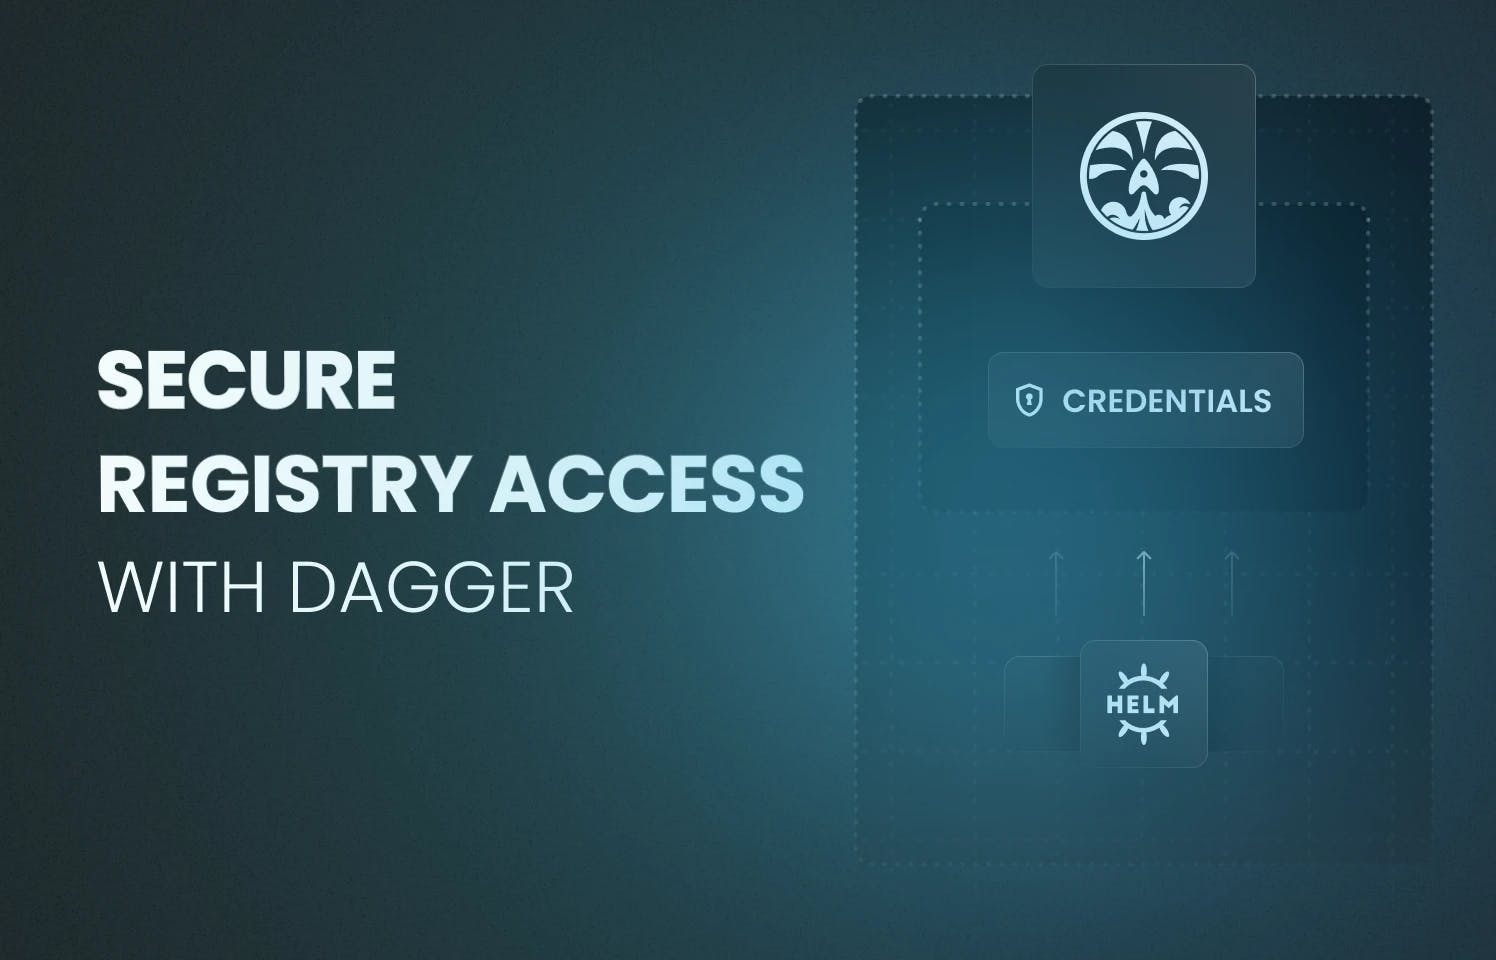 Secure registry access with Dagger